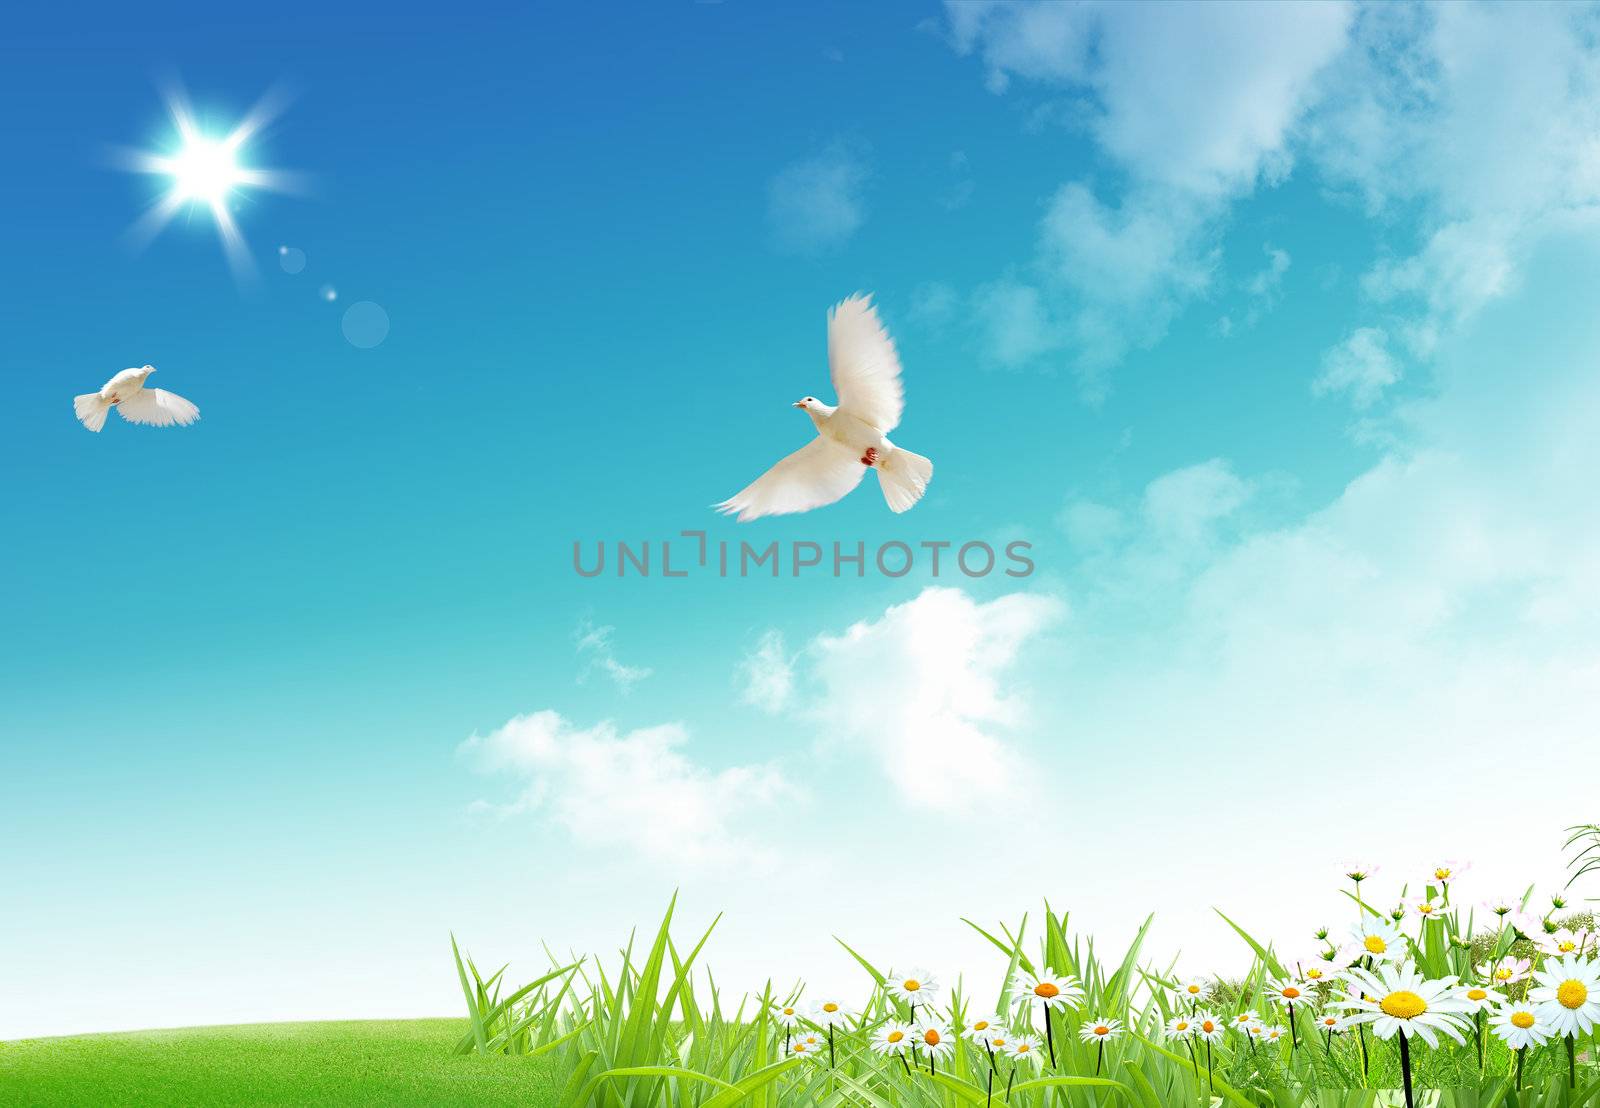 Two free flying white doves with on a blue sky background.